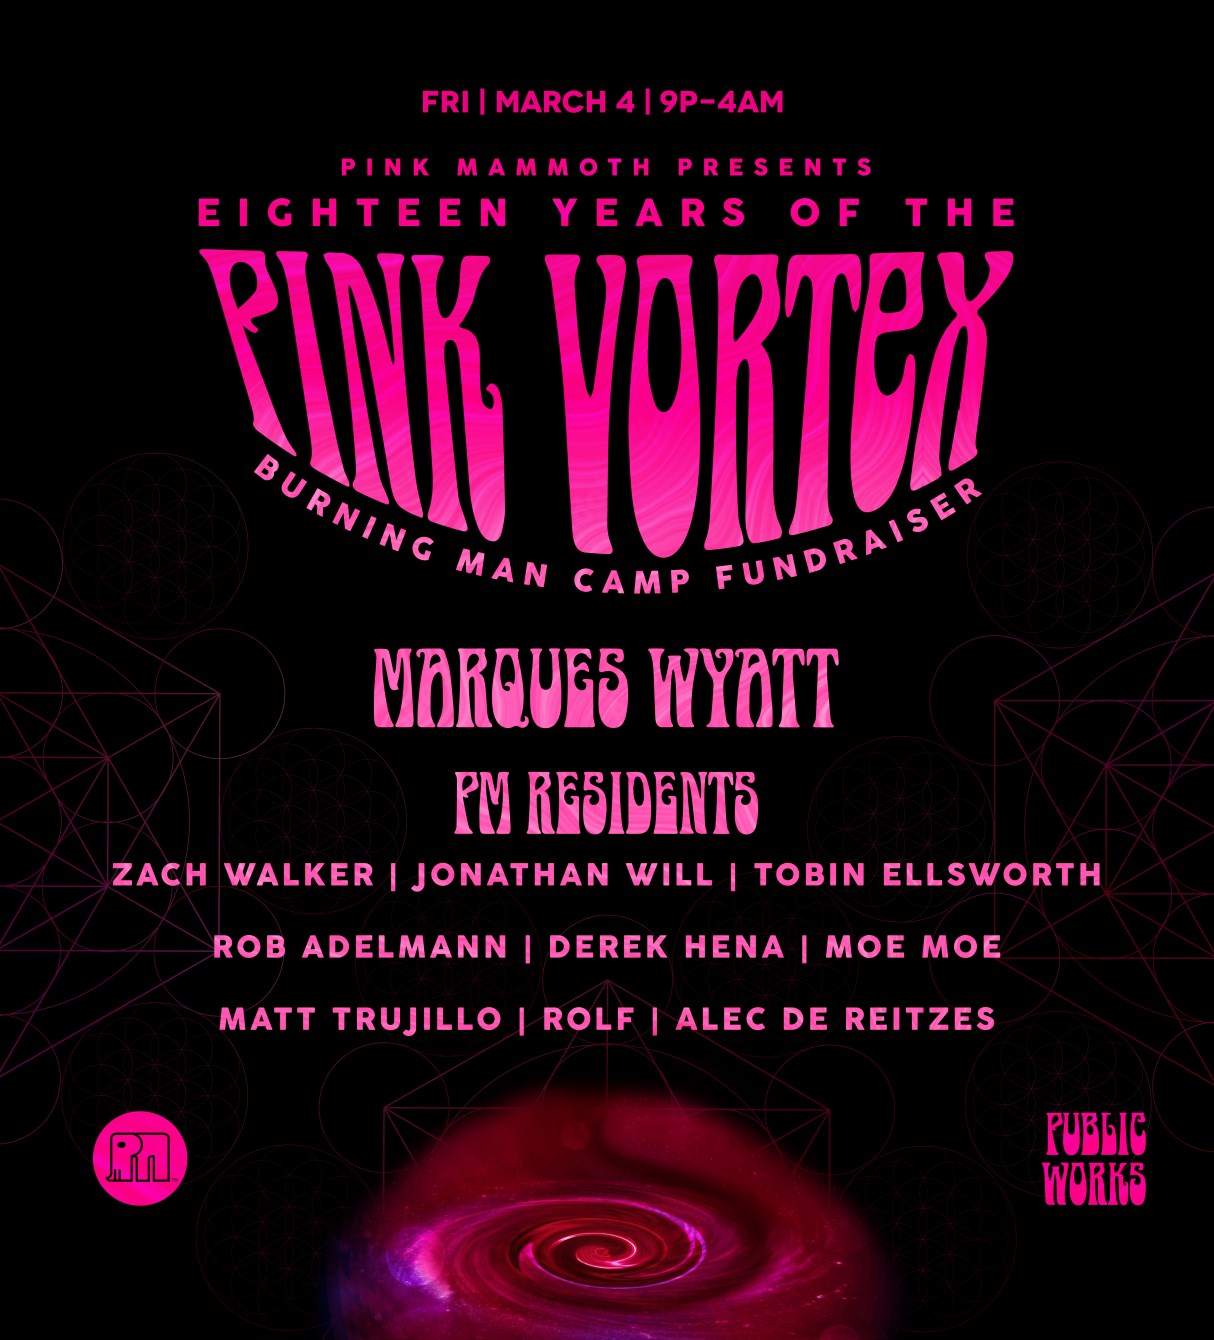 18 Years of the Pink Vortex with Marques Wyatt presented by Pink Mammoth - フライヤー表